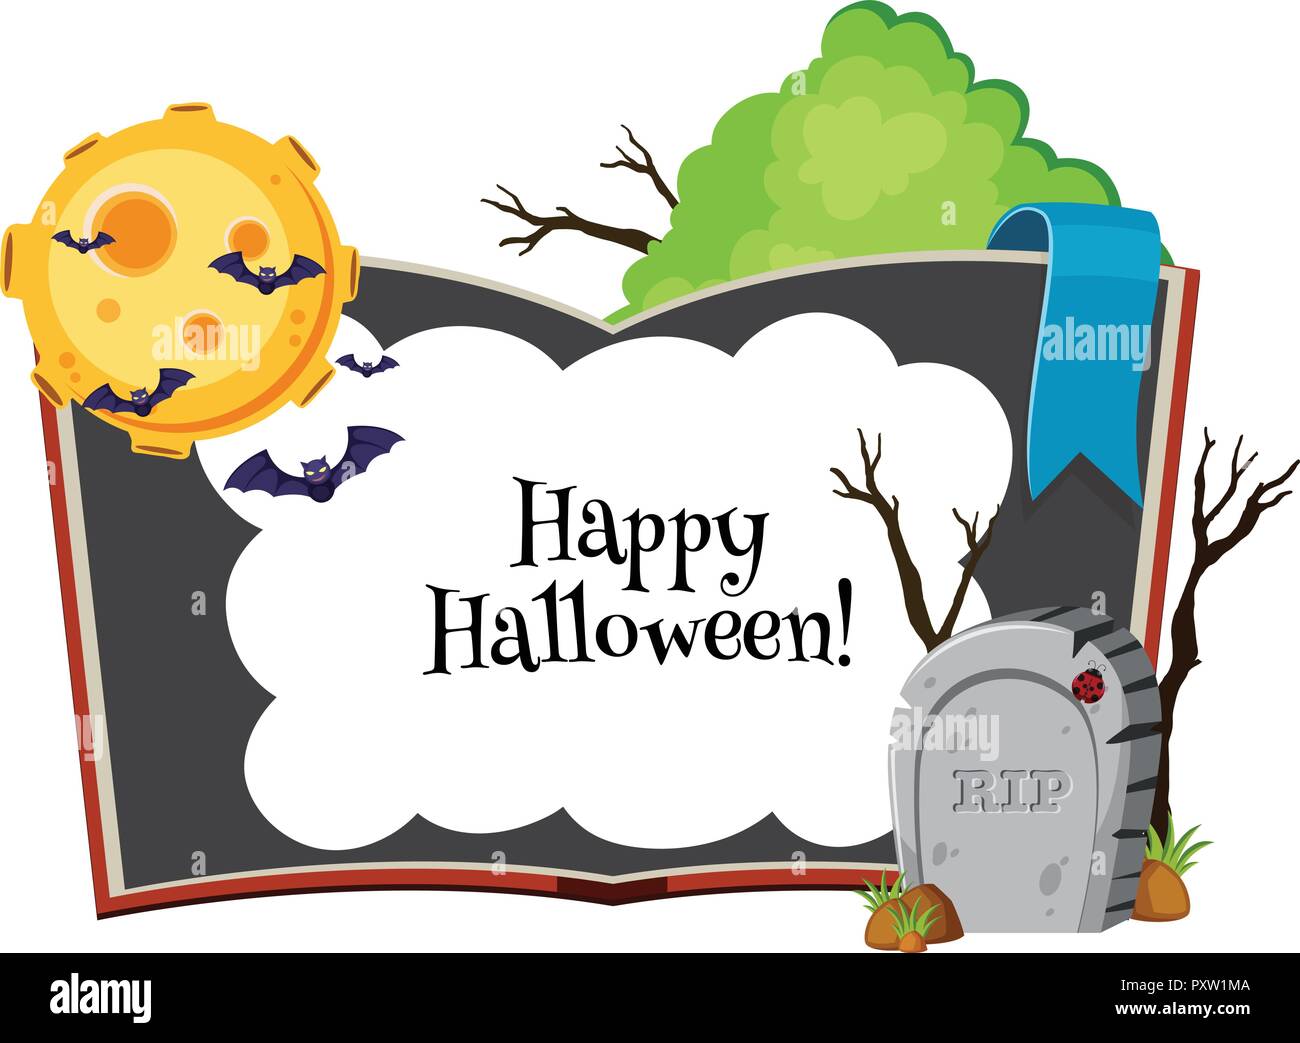 Happy halloween background with bats flying at night illustration Stock Vector